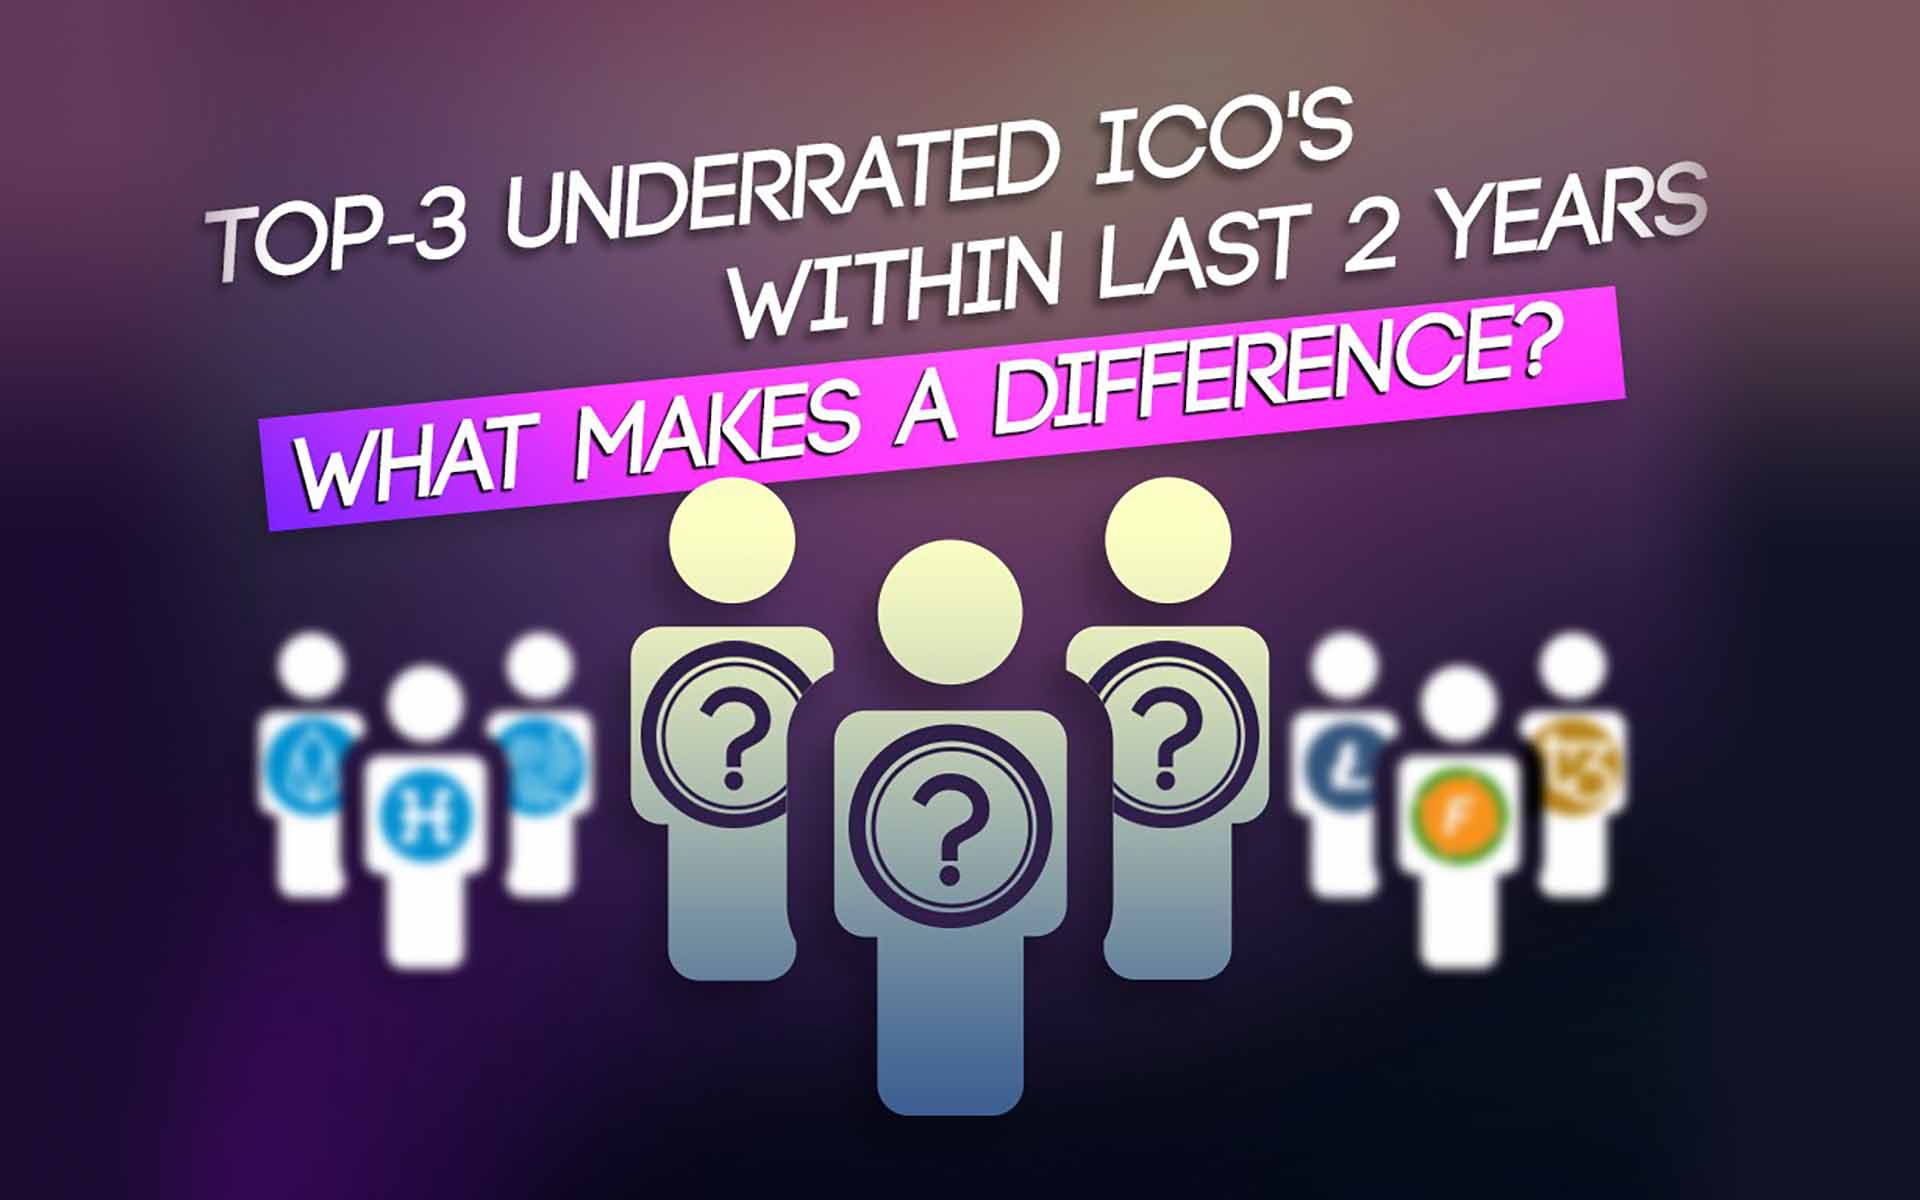 TOP-3 Underrated ICOs Within Last 2 Years: What Makes a Difference?